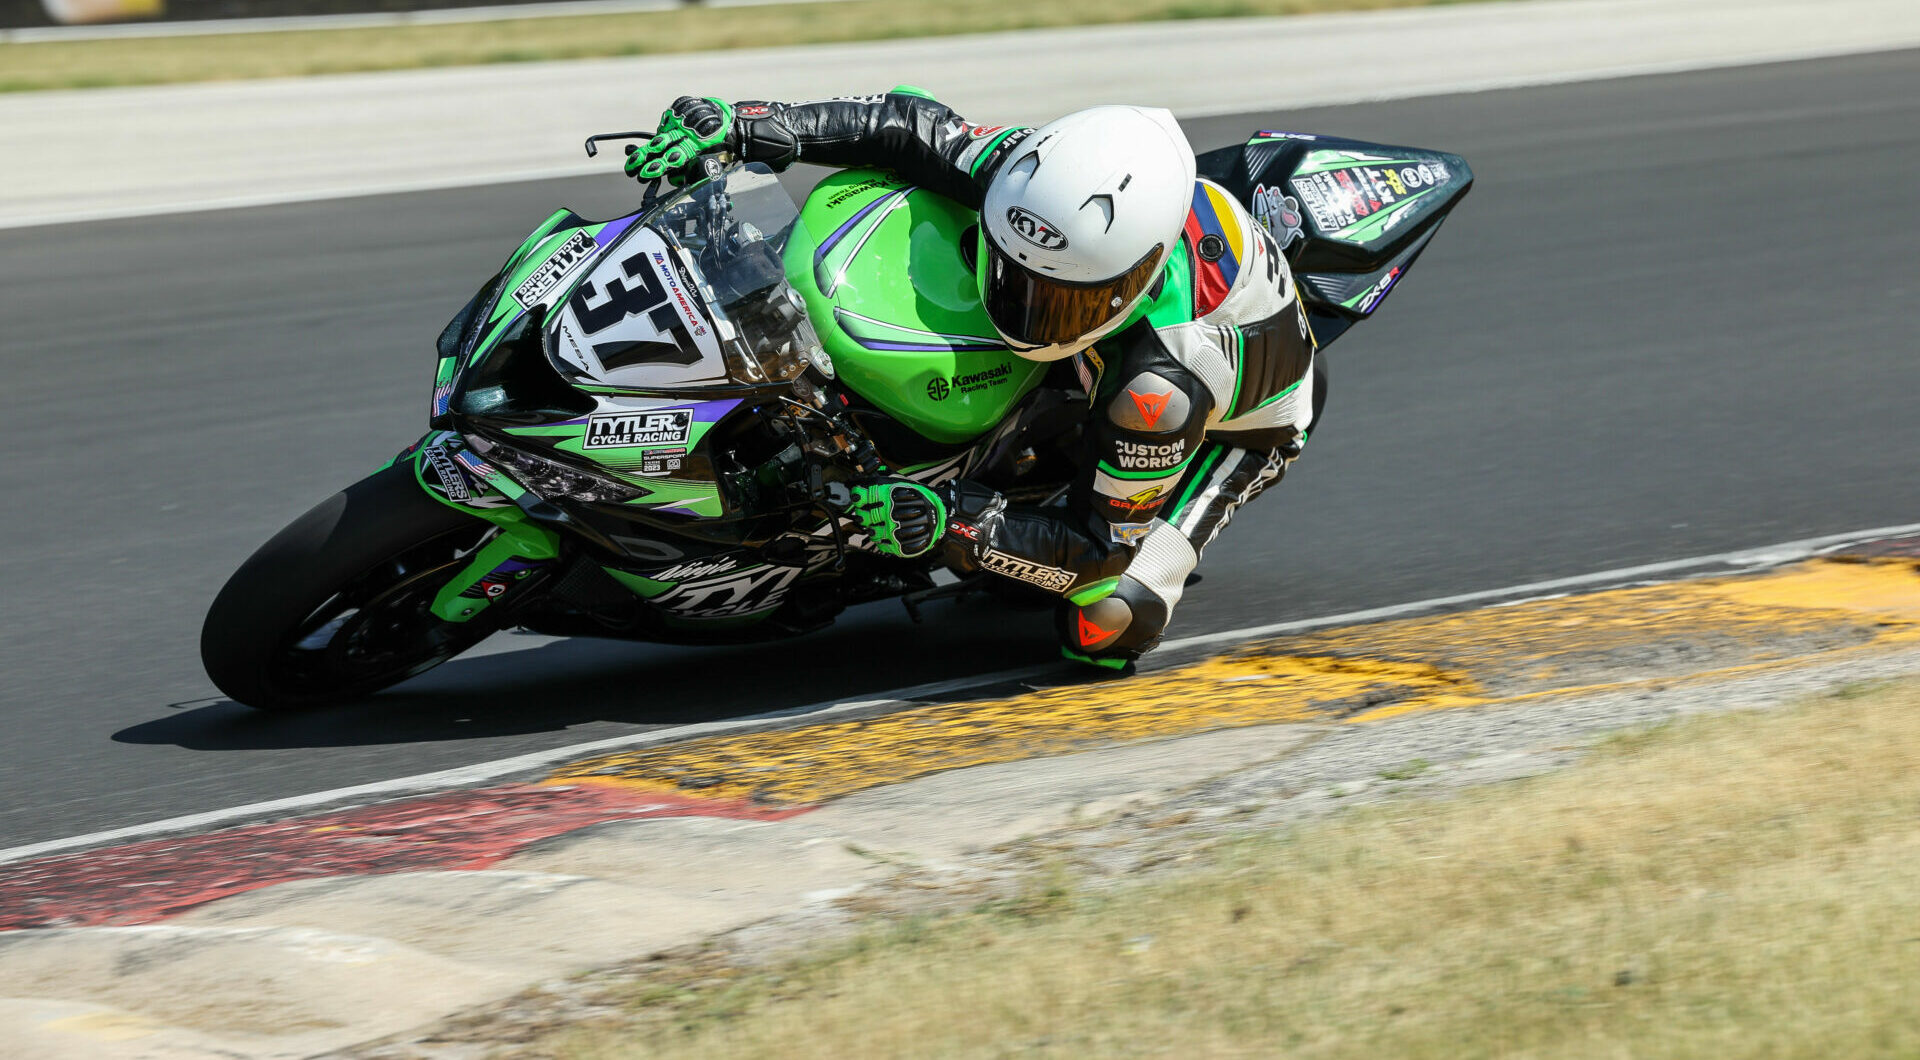 Stefano Mesa (37) in action at Road America. Photo by Brian J. Nelson.